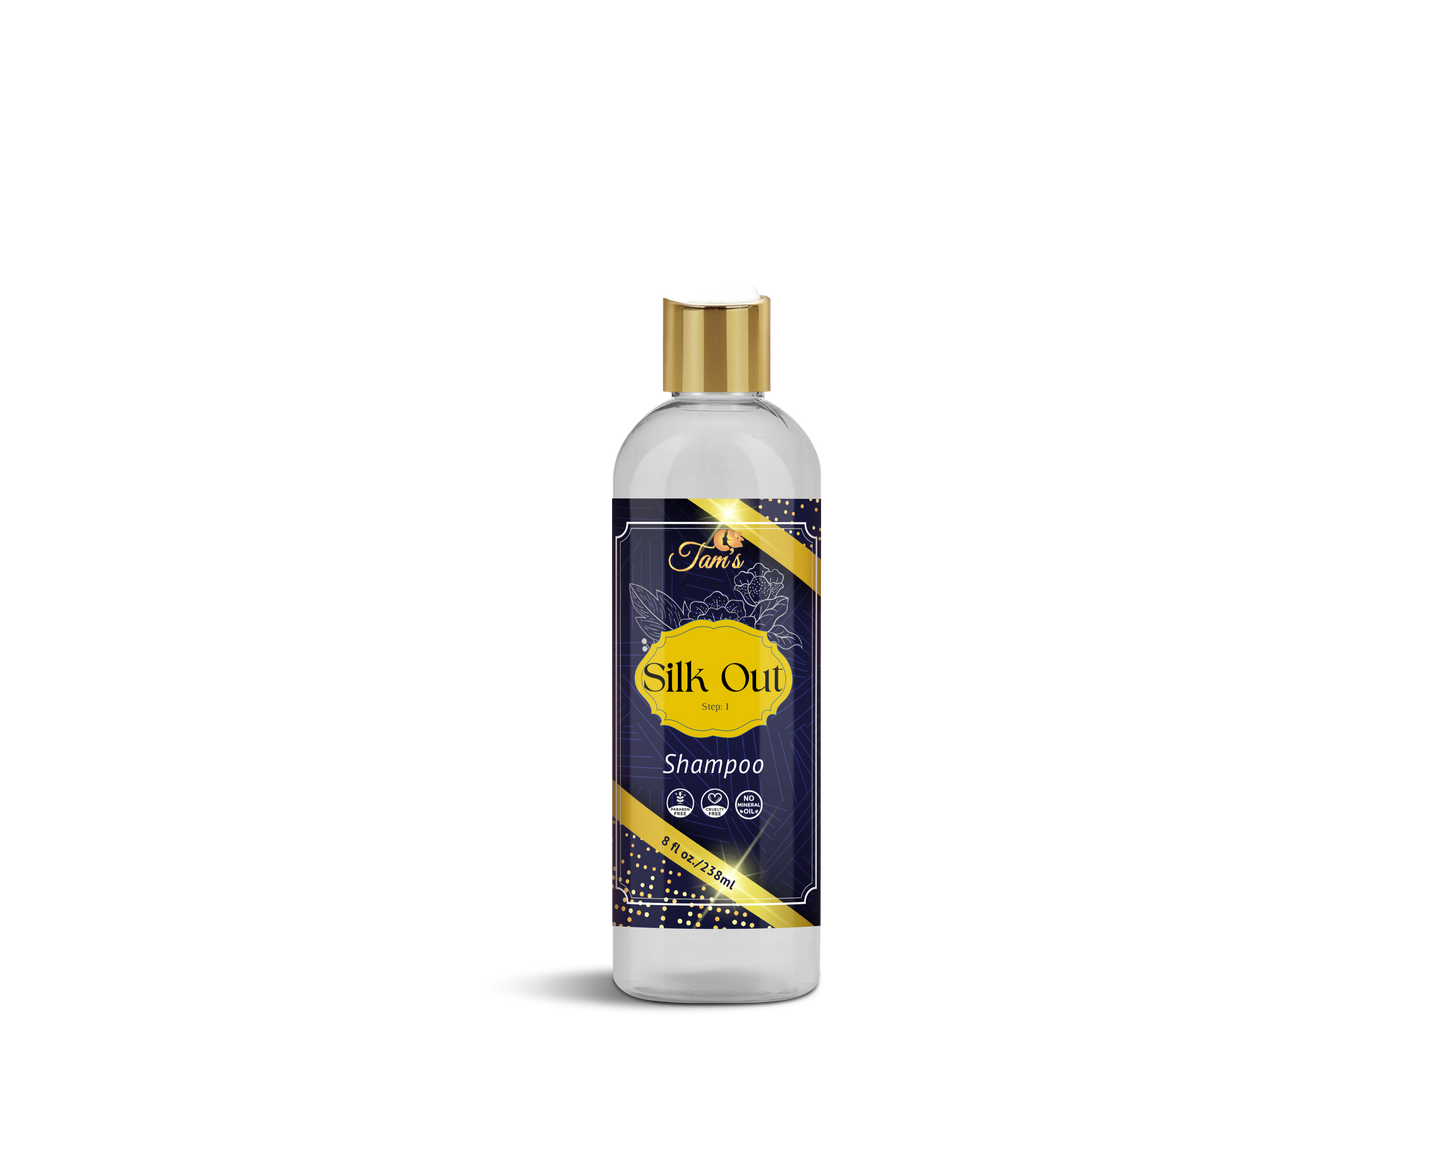 Silk Out Shampoo - Tam's Products